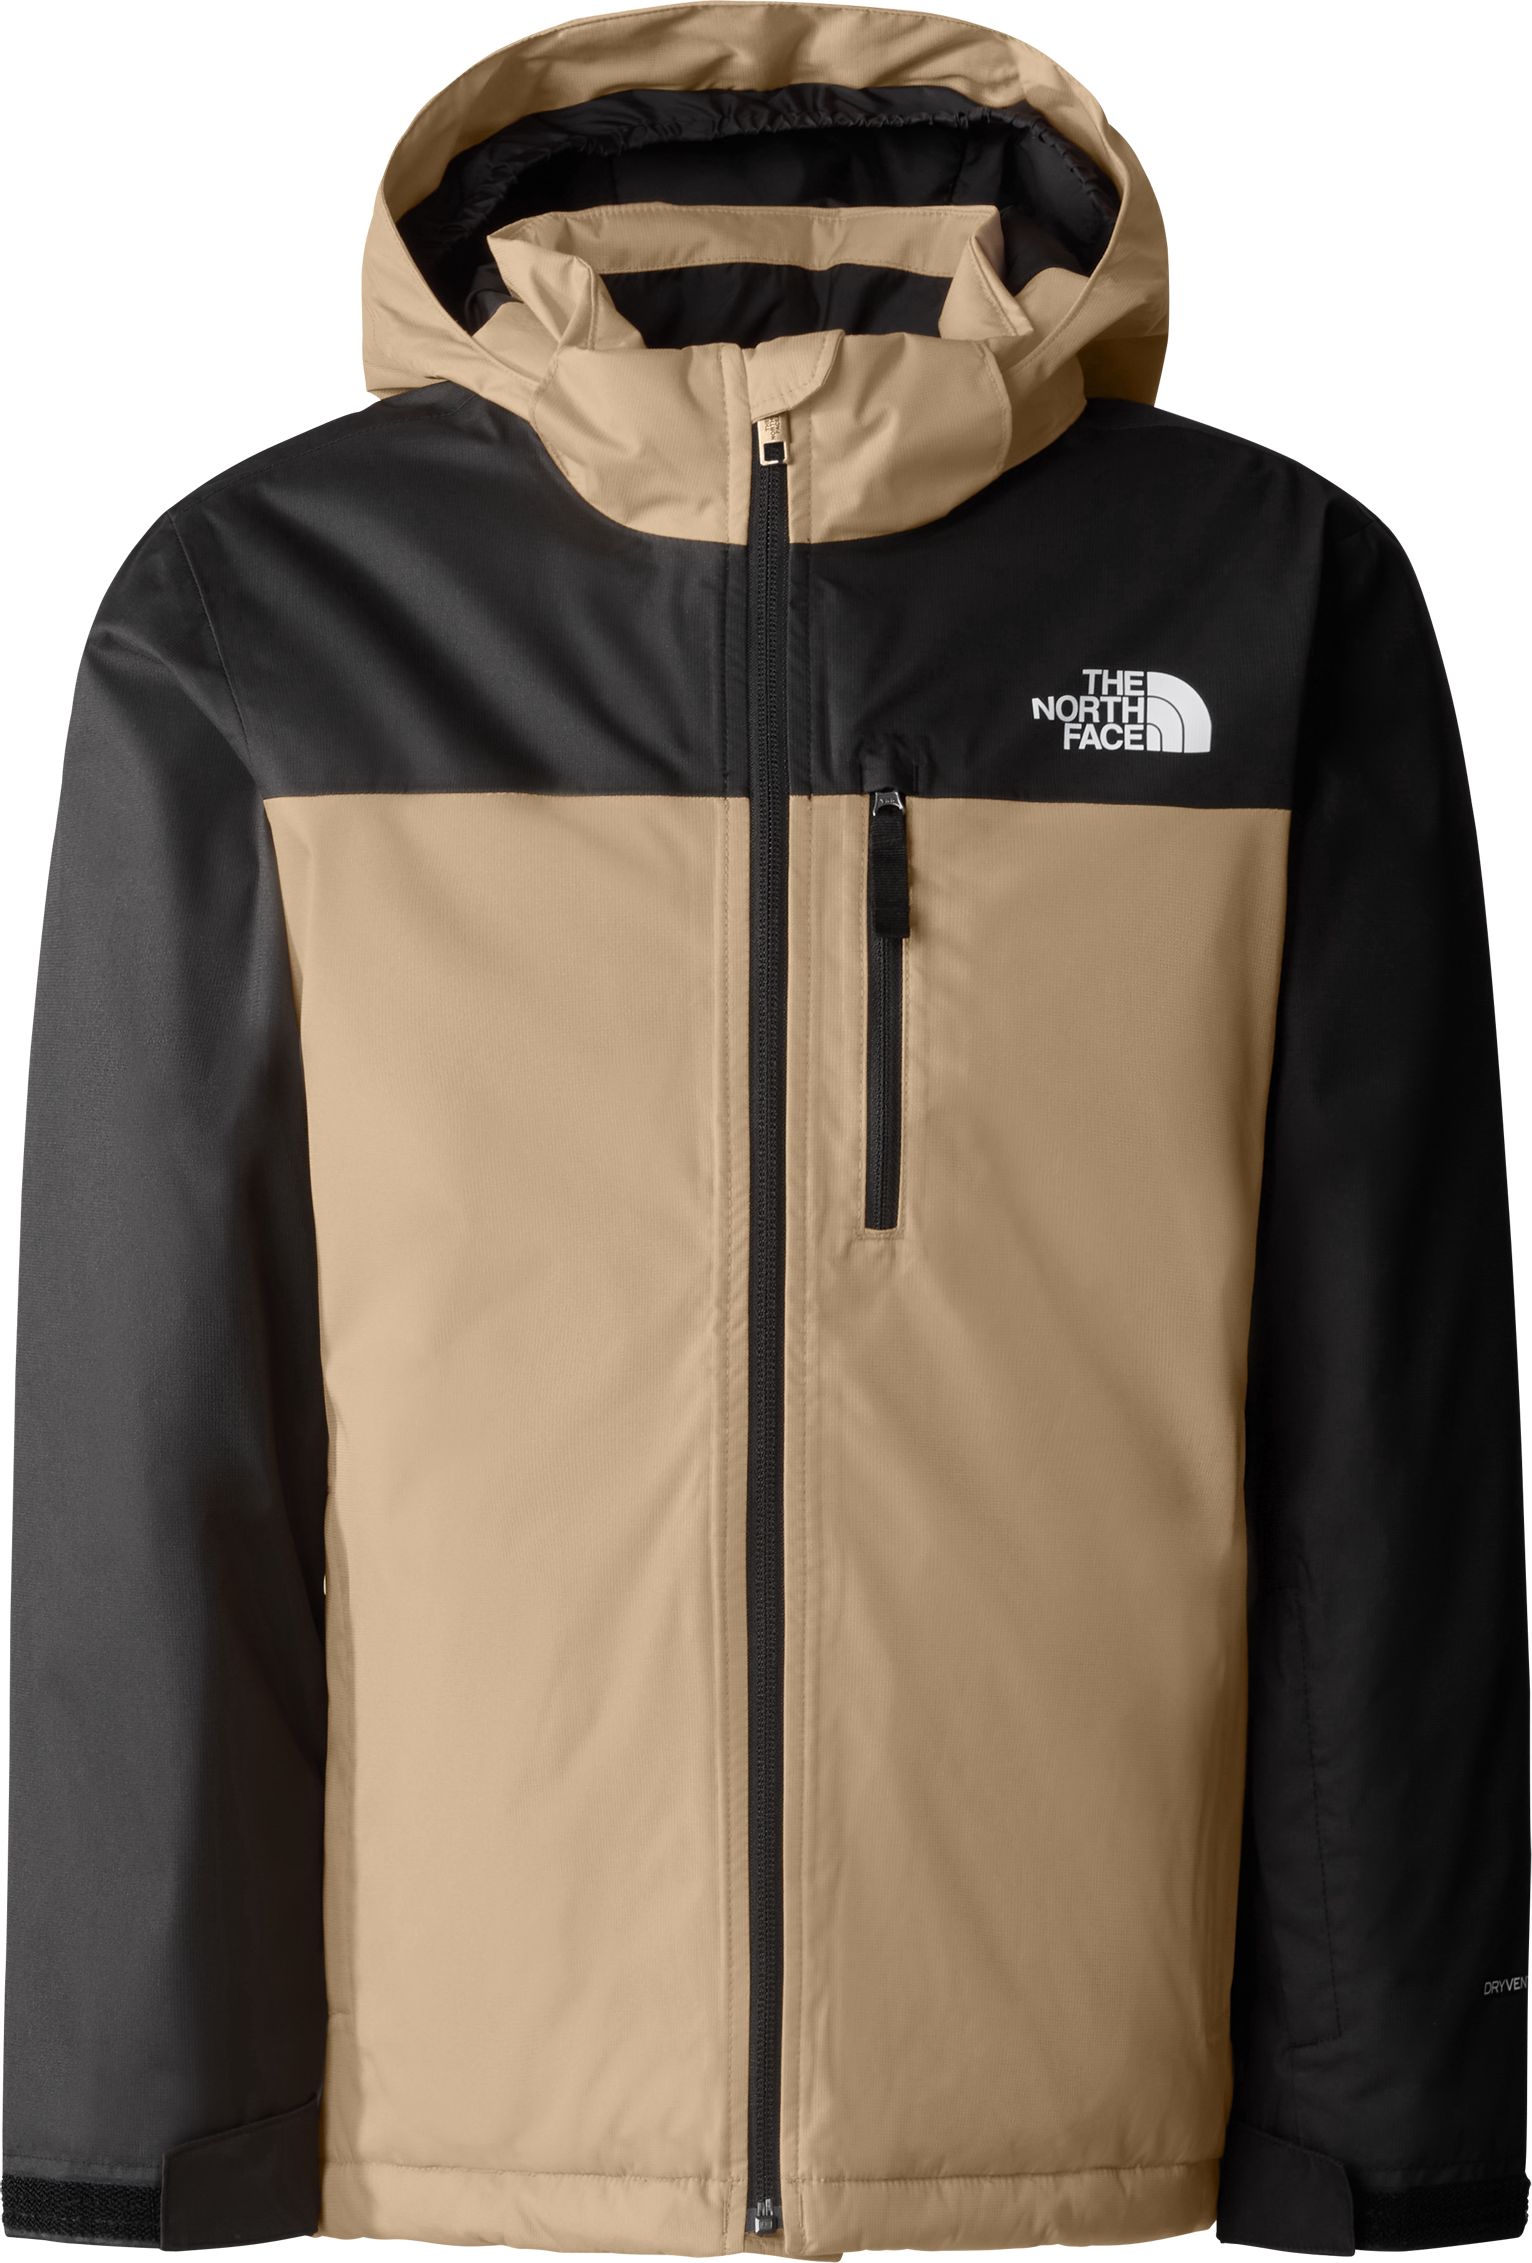 THE NORTH FACE, J SNOWQUEST X INSULATED JACKET